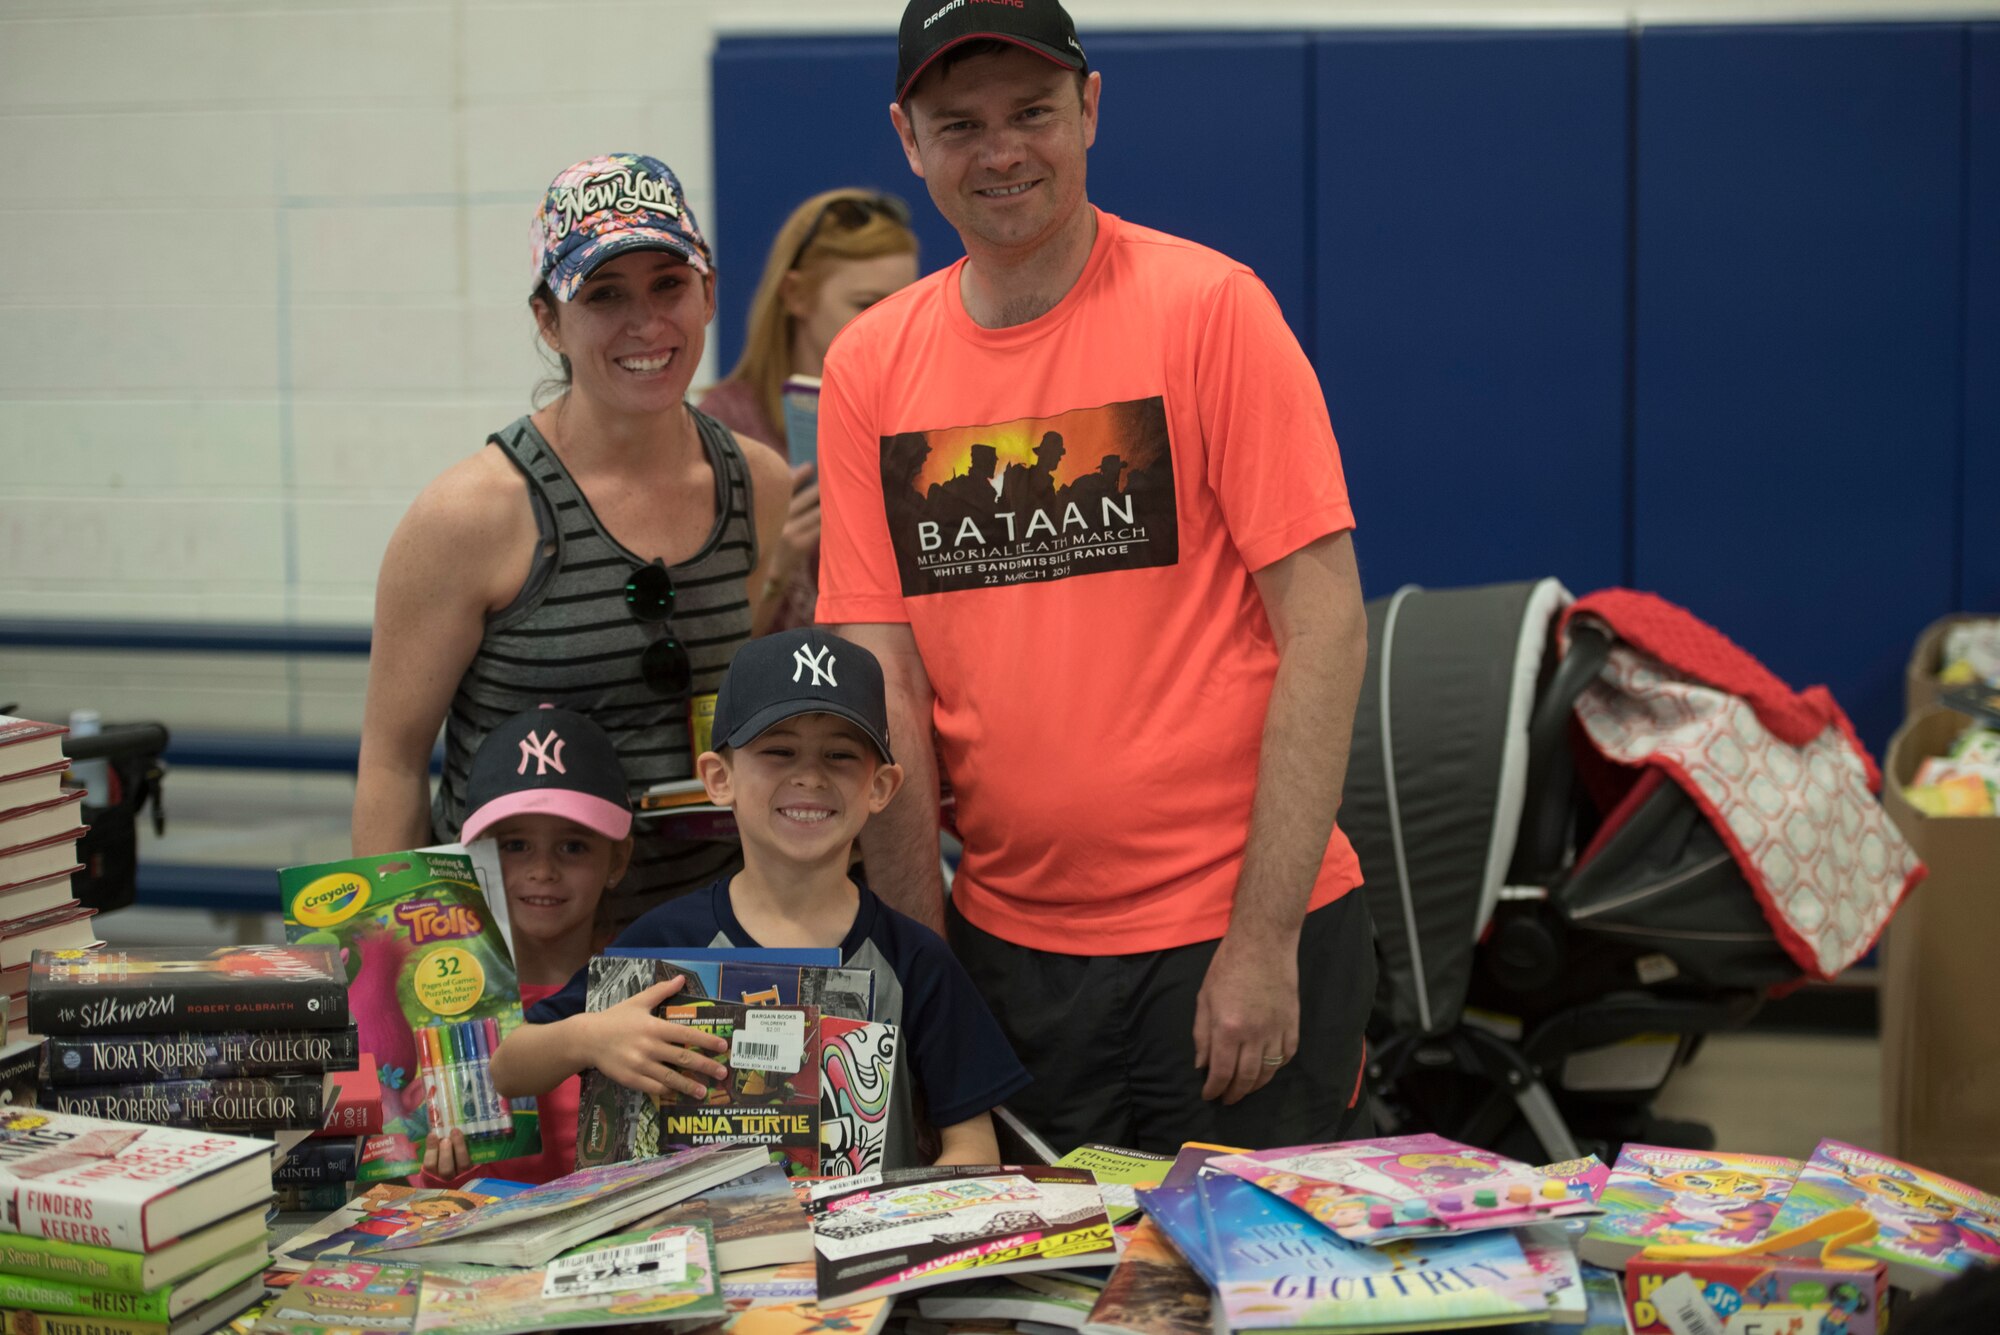 A Family poses during the children’s carnival on Holloman Air Force Base, April 6, 2019. Six thousand books were given out during the event. (U.S. Air Force Photo by Staff Sgt. Timothy Young)